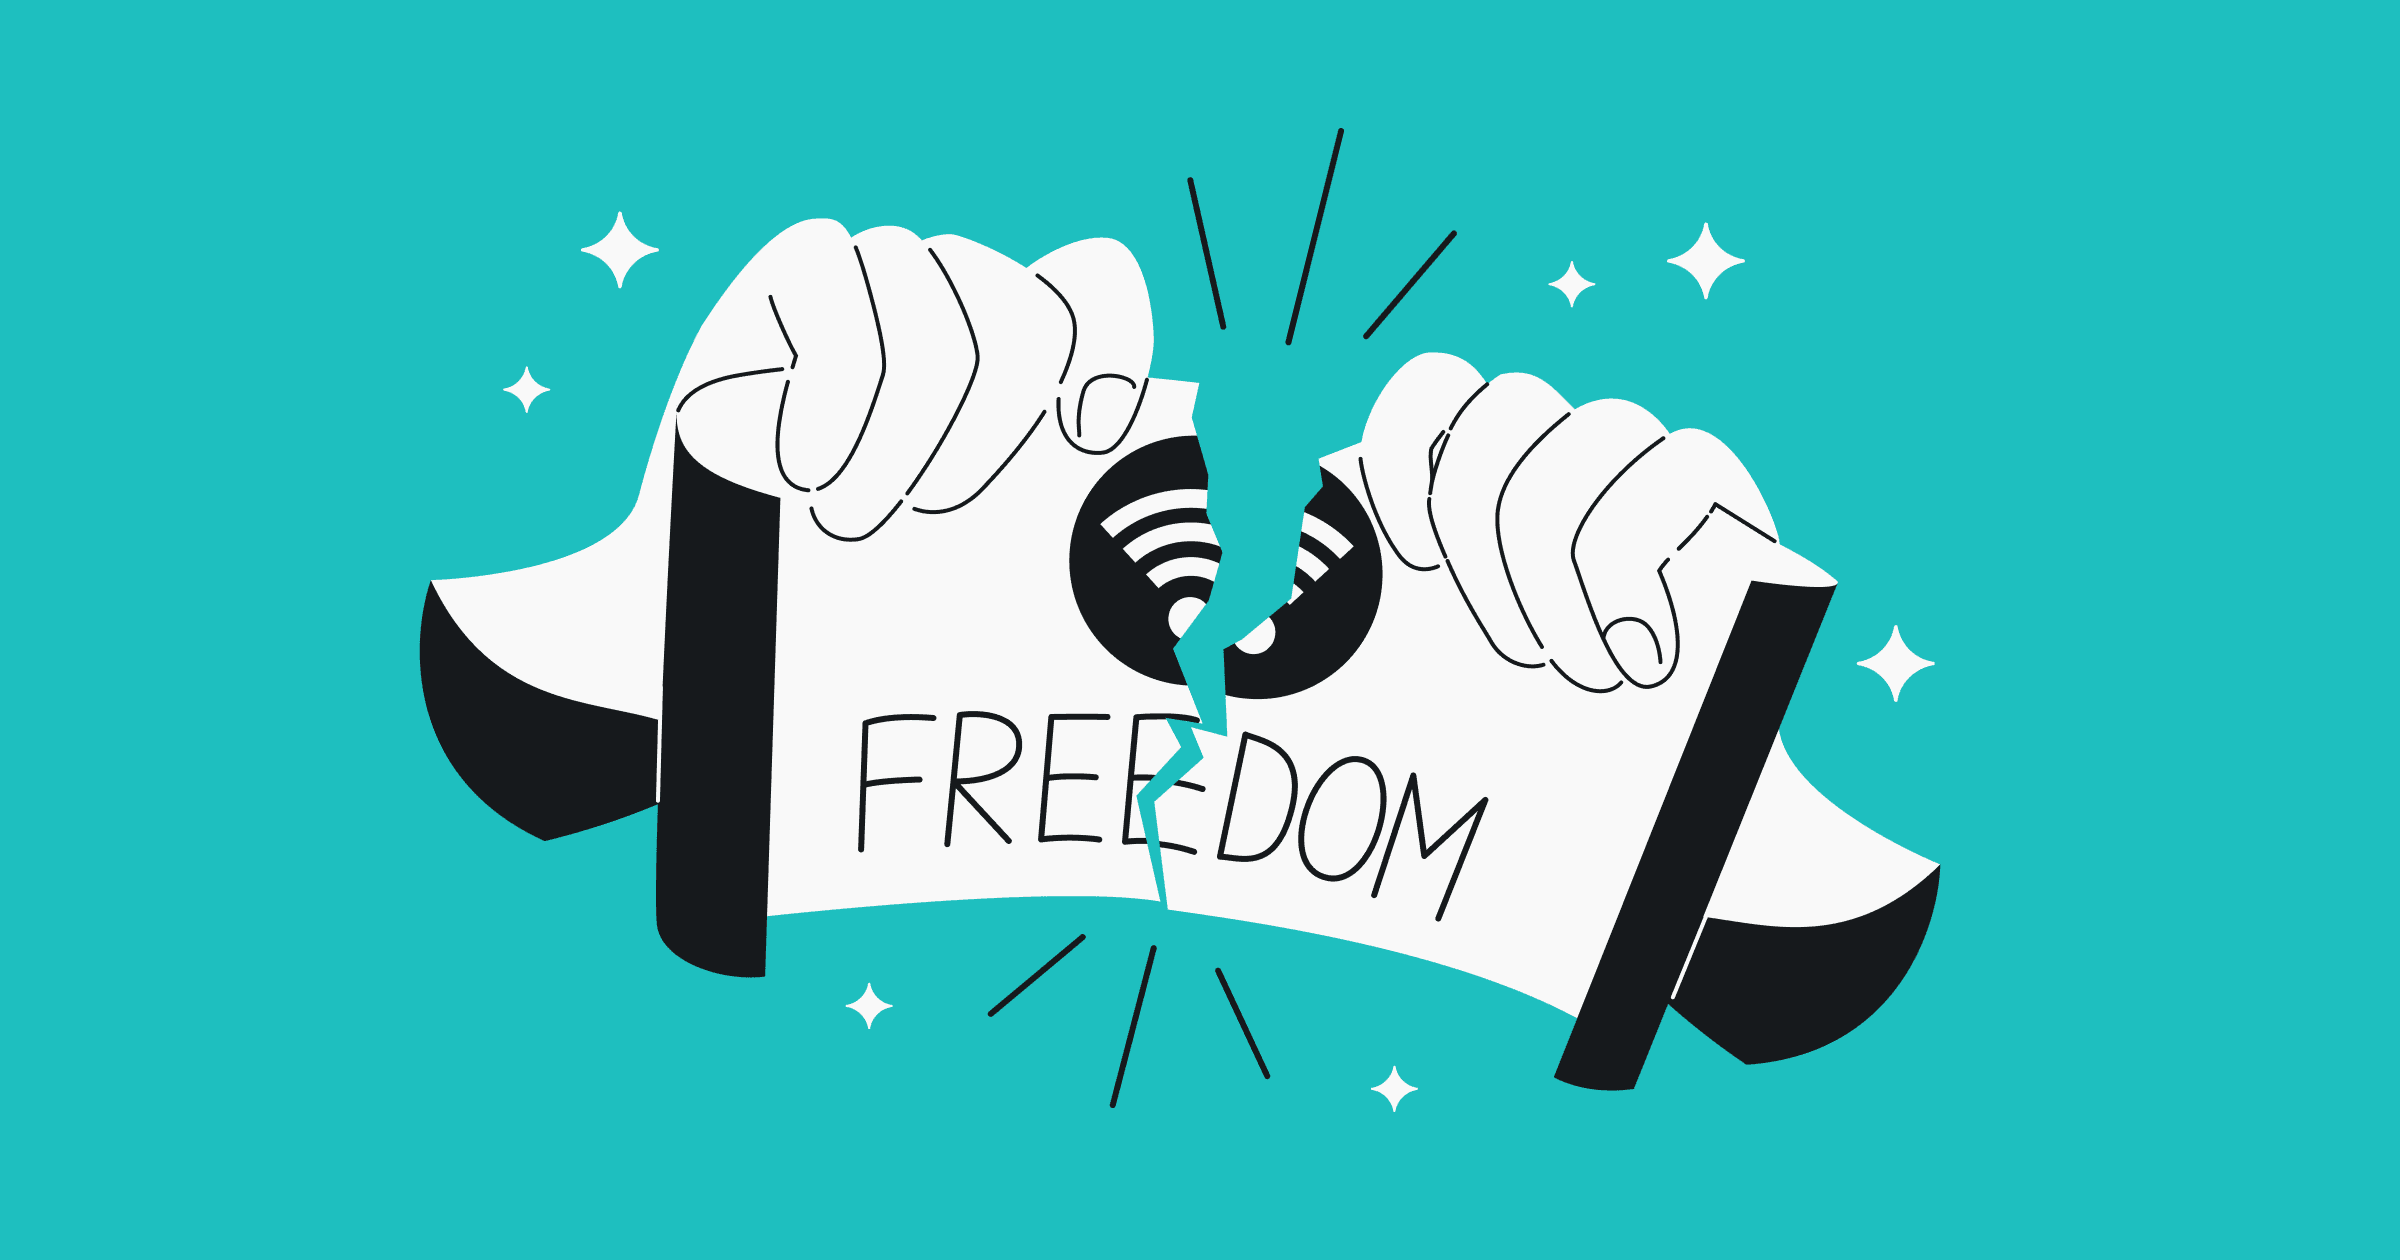 Broken promises: 15 countries pledge to uphold free internet, yet still impose restrictions